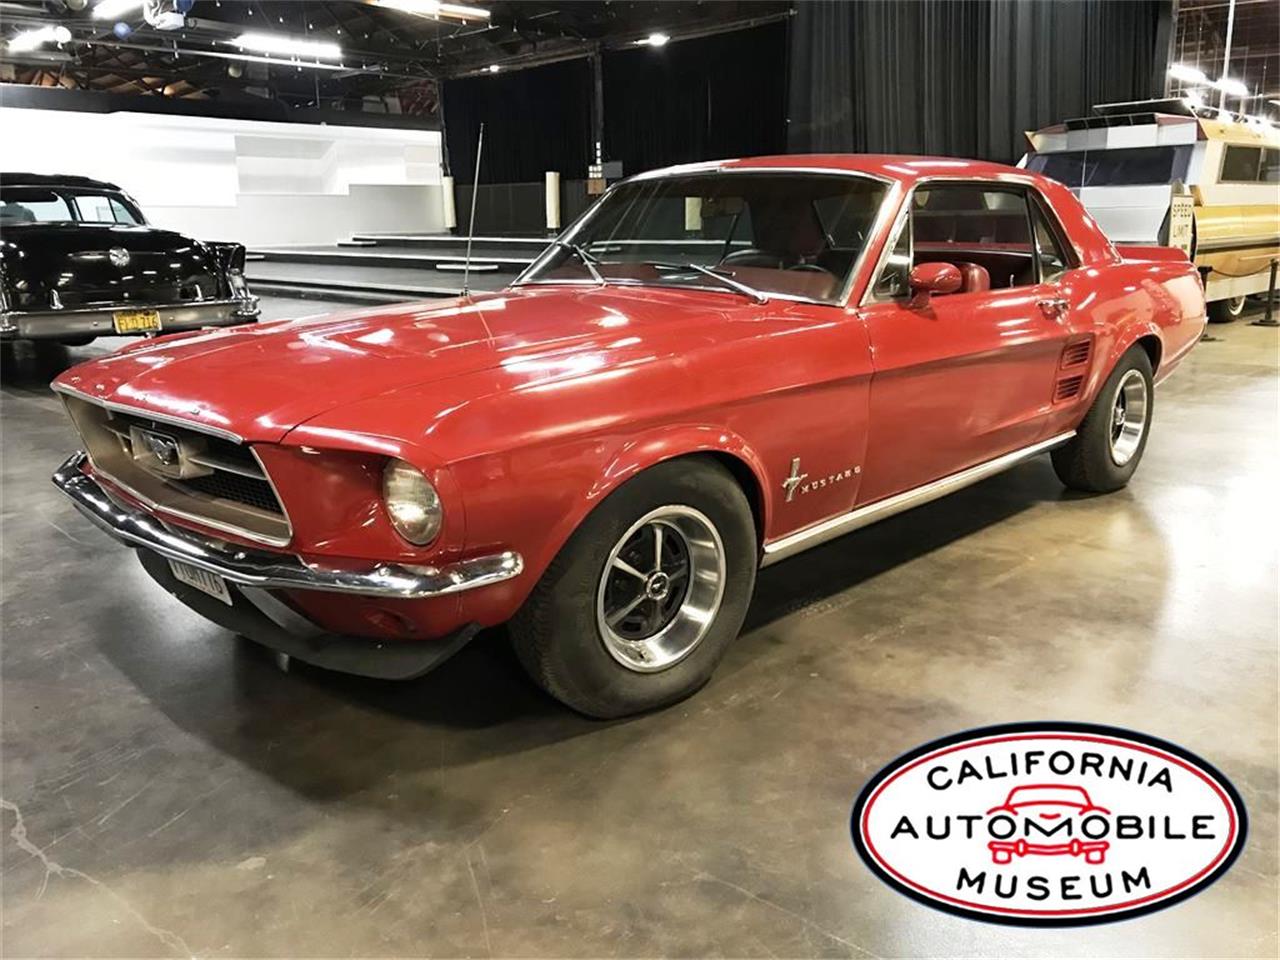  1967  Ford  Mustang  for Sale ClassicCars com CC 1066200